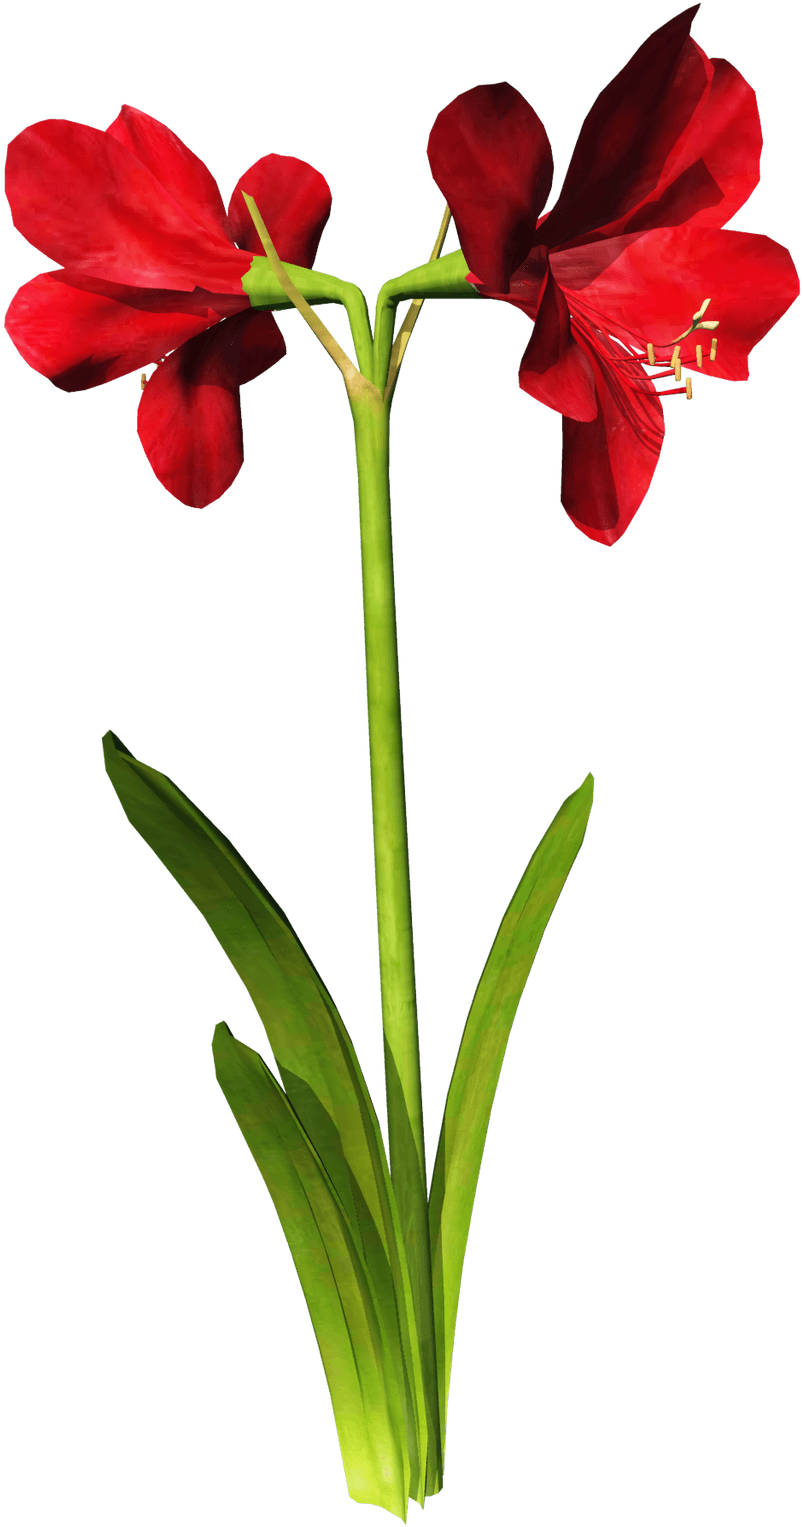 Free High Resolution Graphics And Clip Art - Flower (1199x1600)